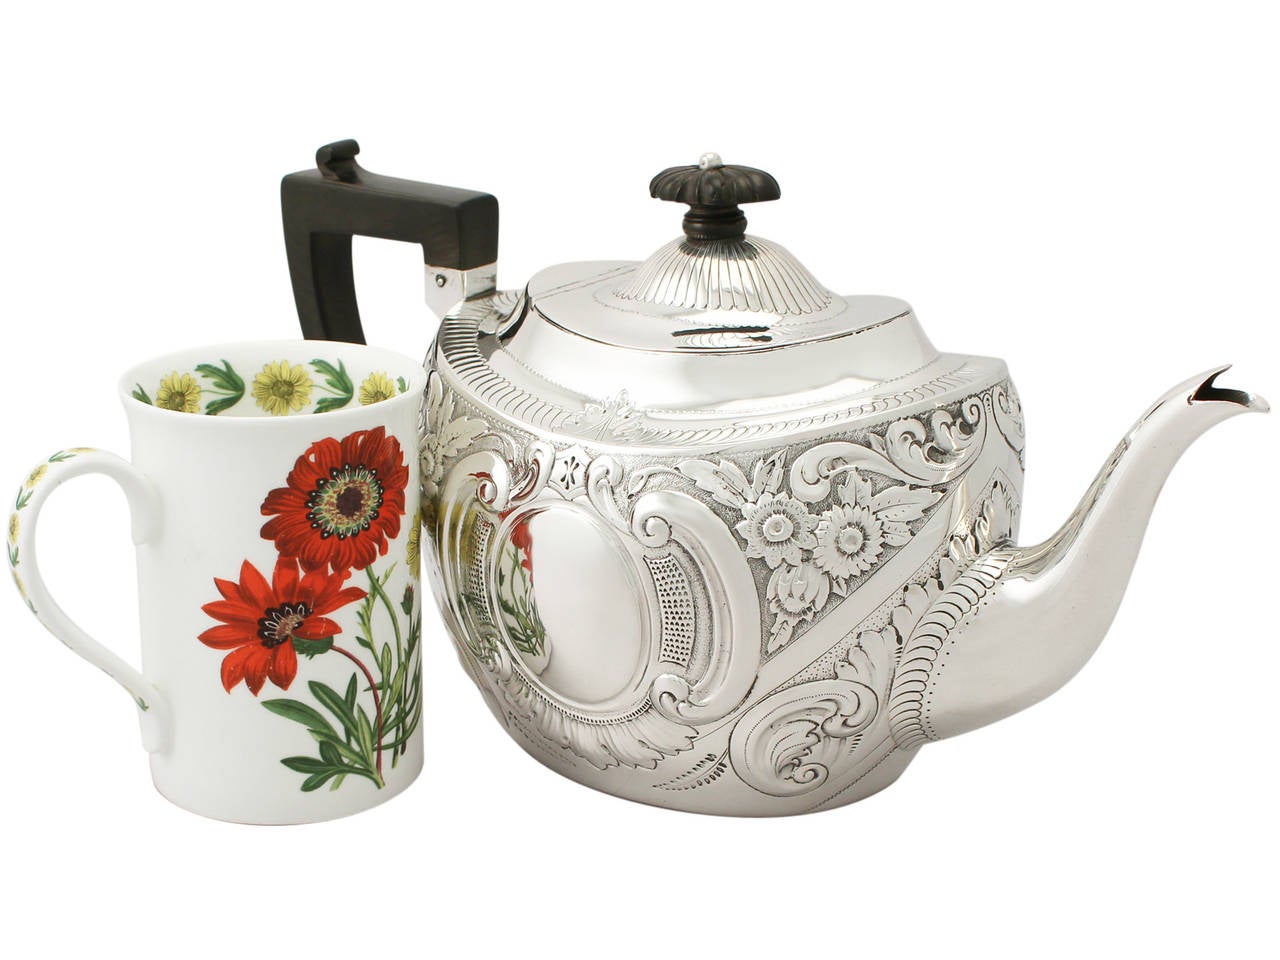 A fine and impressive antique Edwardian English sterling silver teapot; an addition to our silver teaware collection

This fine antique Edwardian sterling silver teapot has an oval rounded form.

The body of the teapot is embellished with embossed